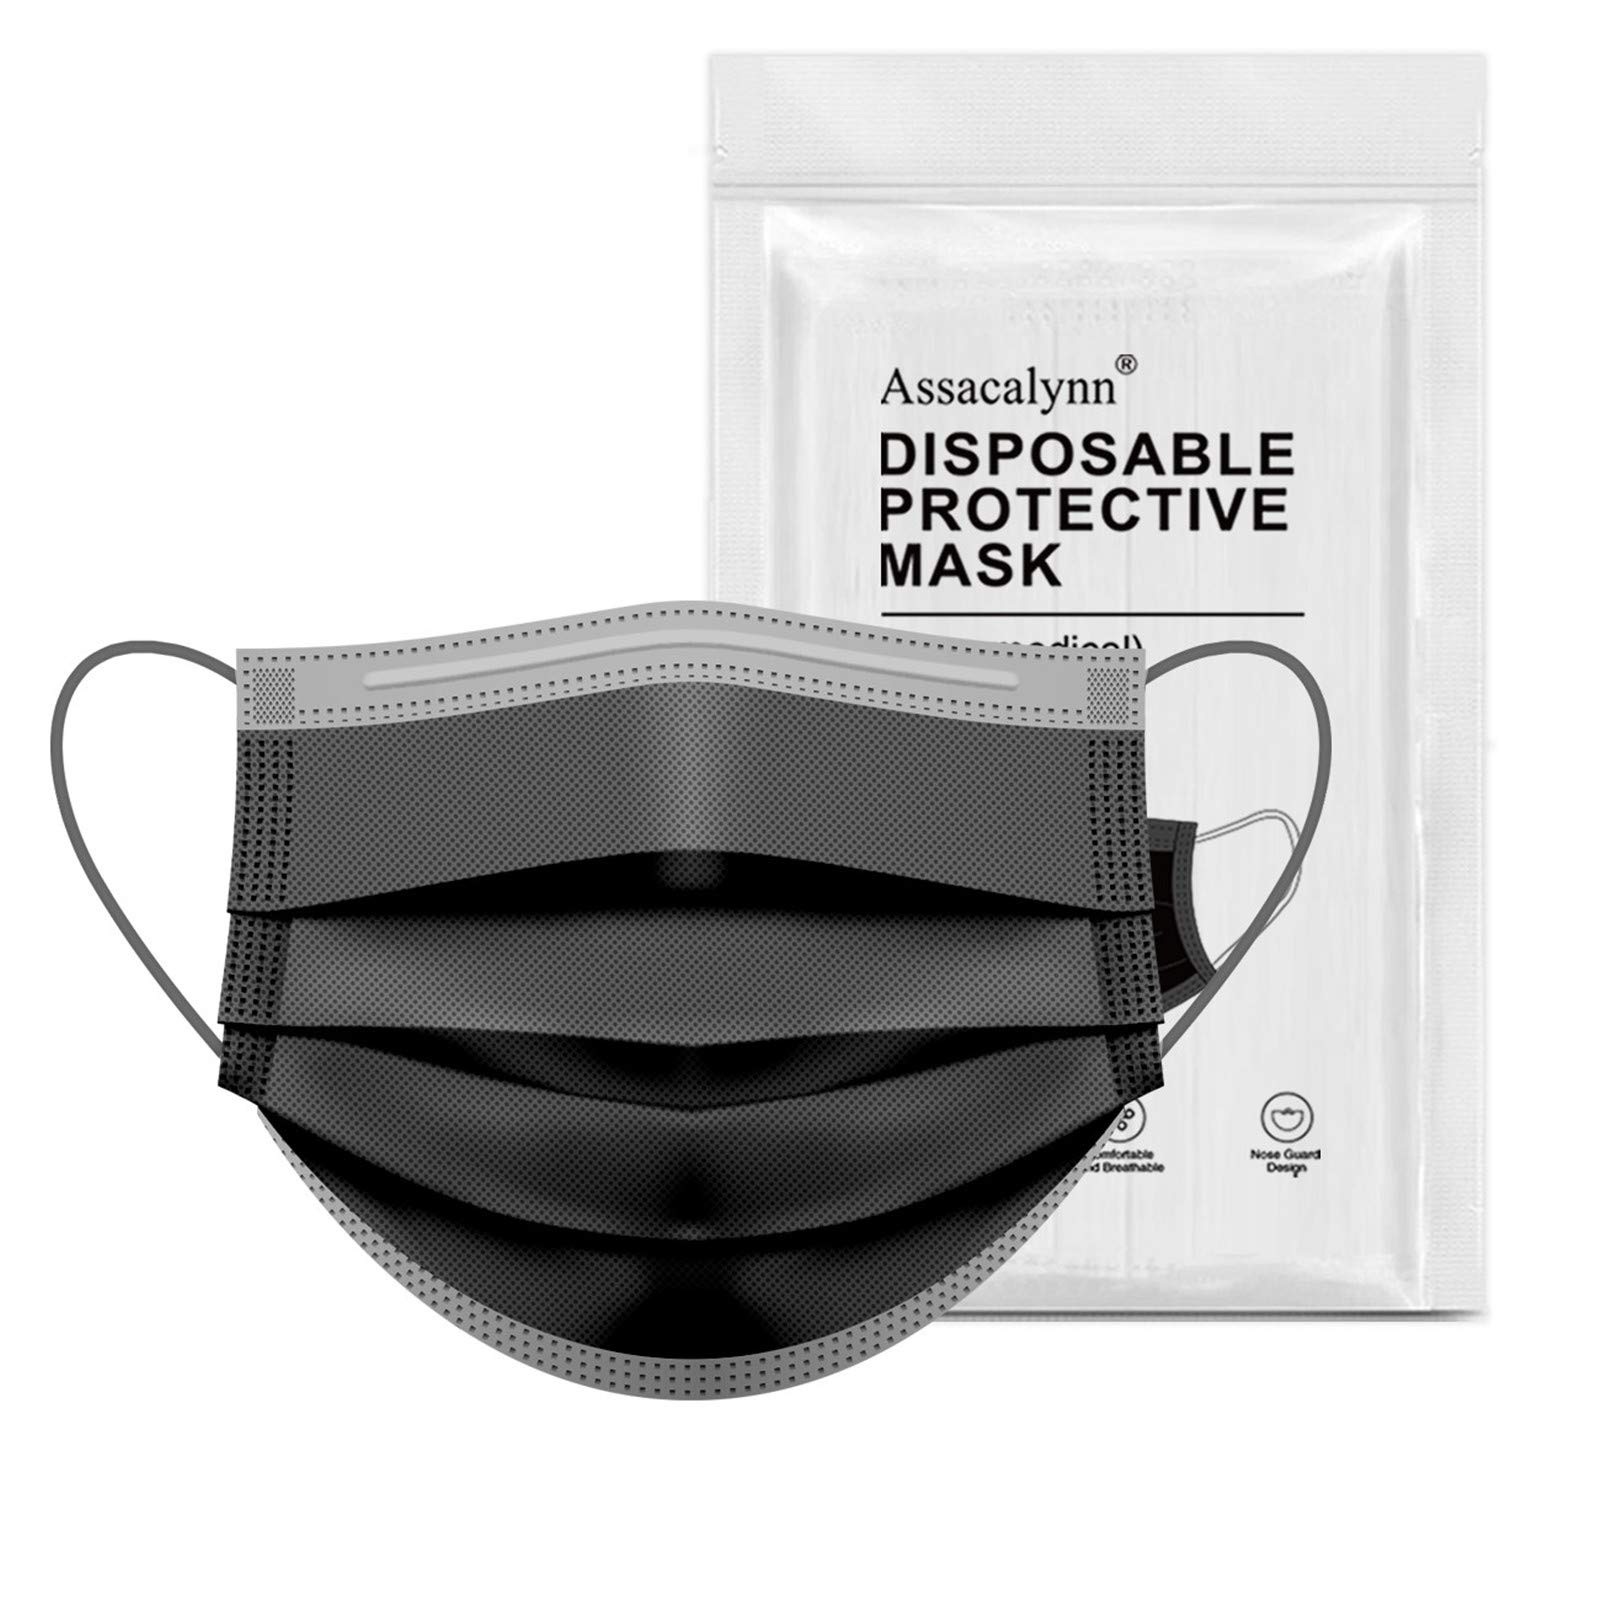 Assacalynn 50pcs Disposable Face Mask with Wider Elastic Ear Loops, 3-Layer Safety Mask for Dust, Droplets Suitable for Adults, Teenagers, Men, Women, Indoor, Outdoor - Black - - Amazon.com 防护口罩